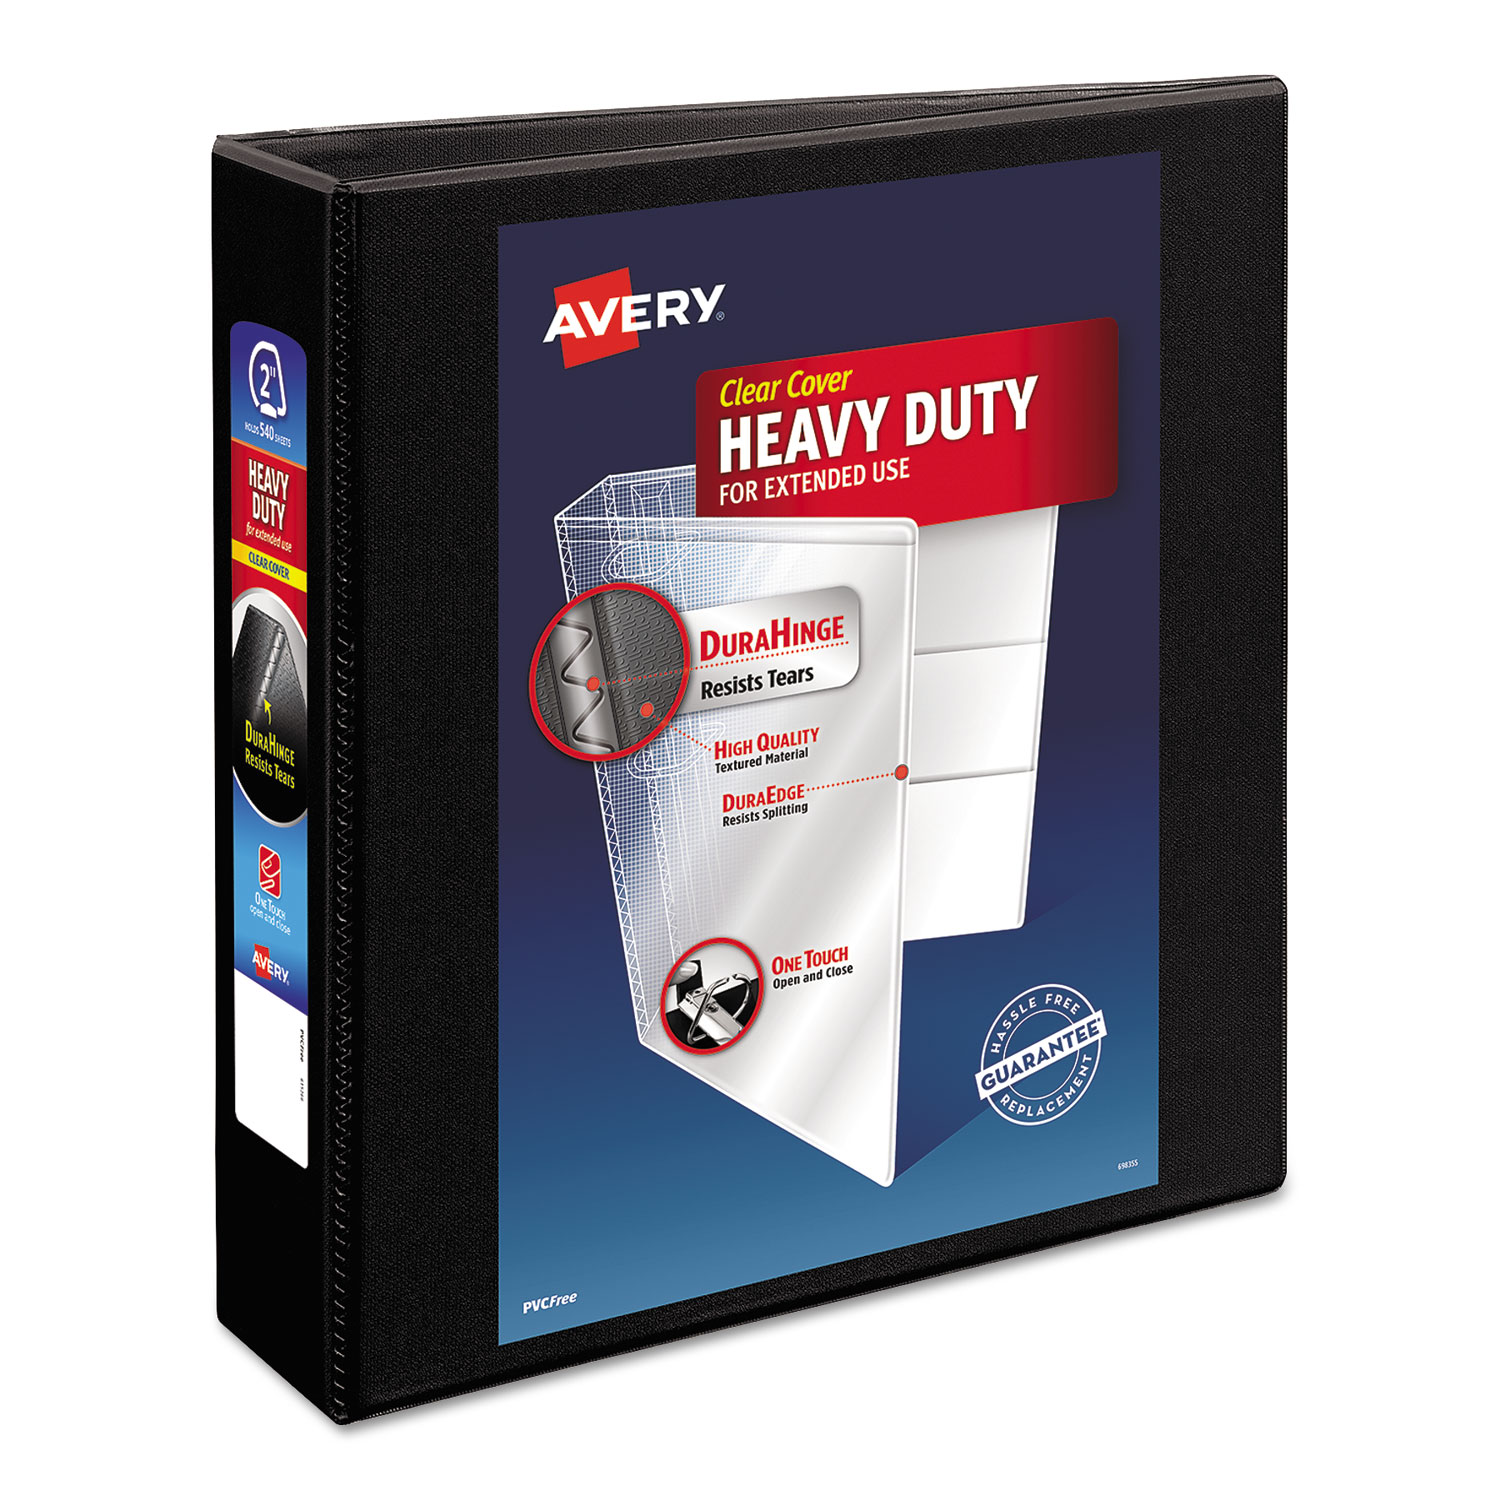  Avery 05500 Heavy-Duty Non Stick View Binder with DuraHinge and Slant Rings, 3 Rings, 2 Capacity, 11 x 8.5, Black (AVE05500) 